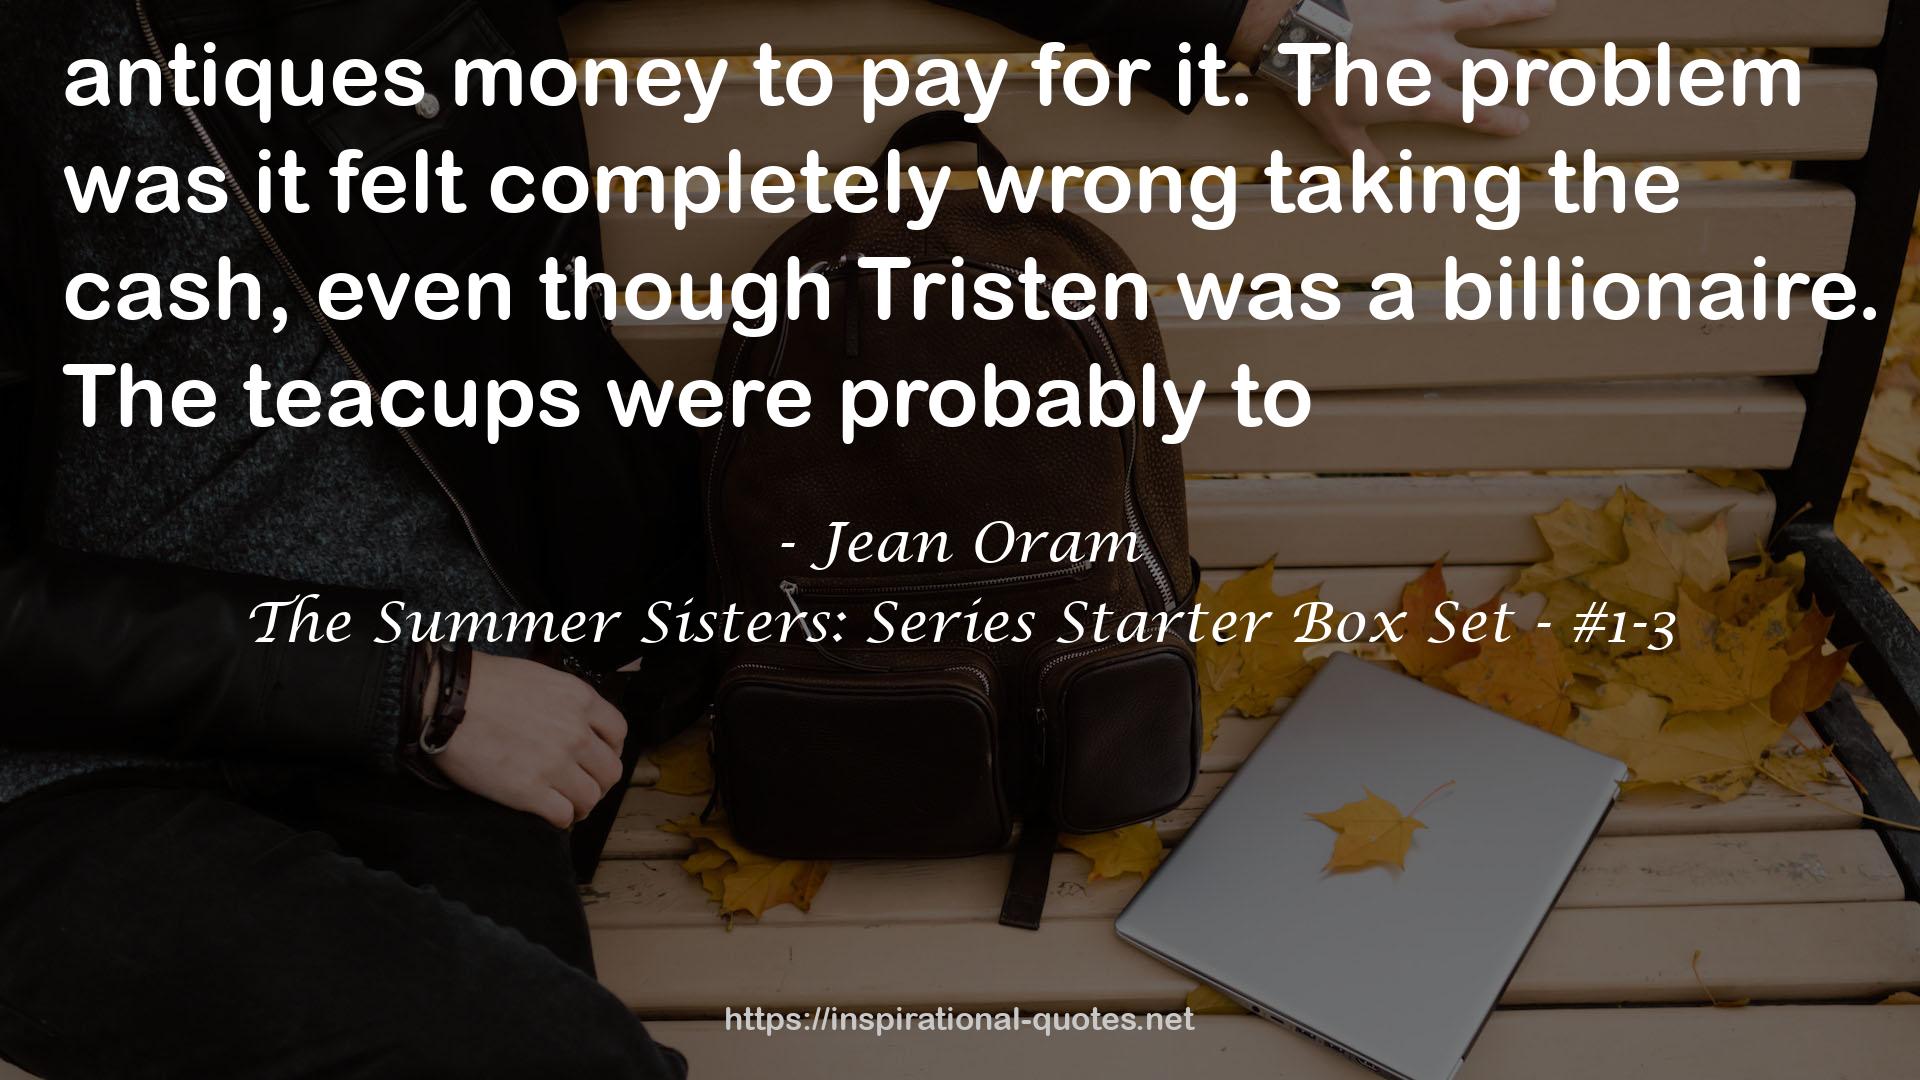 The Summer Sisters: Series Starter Box Set - #1-3 QUOTES